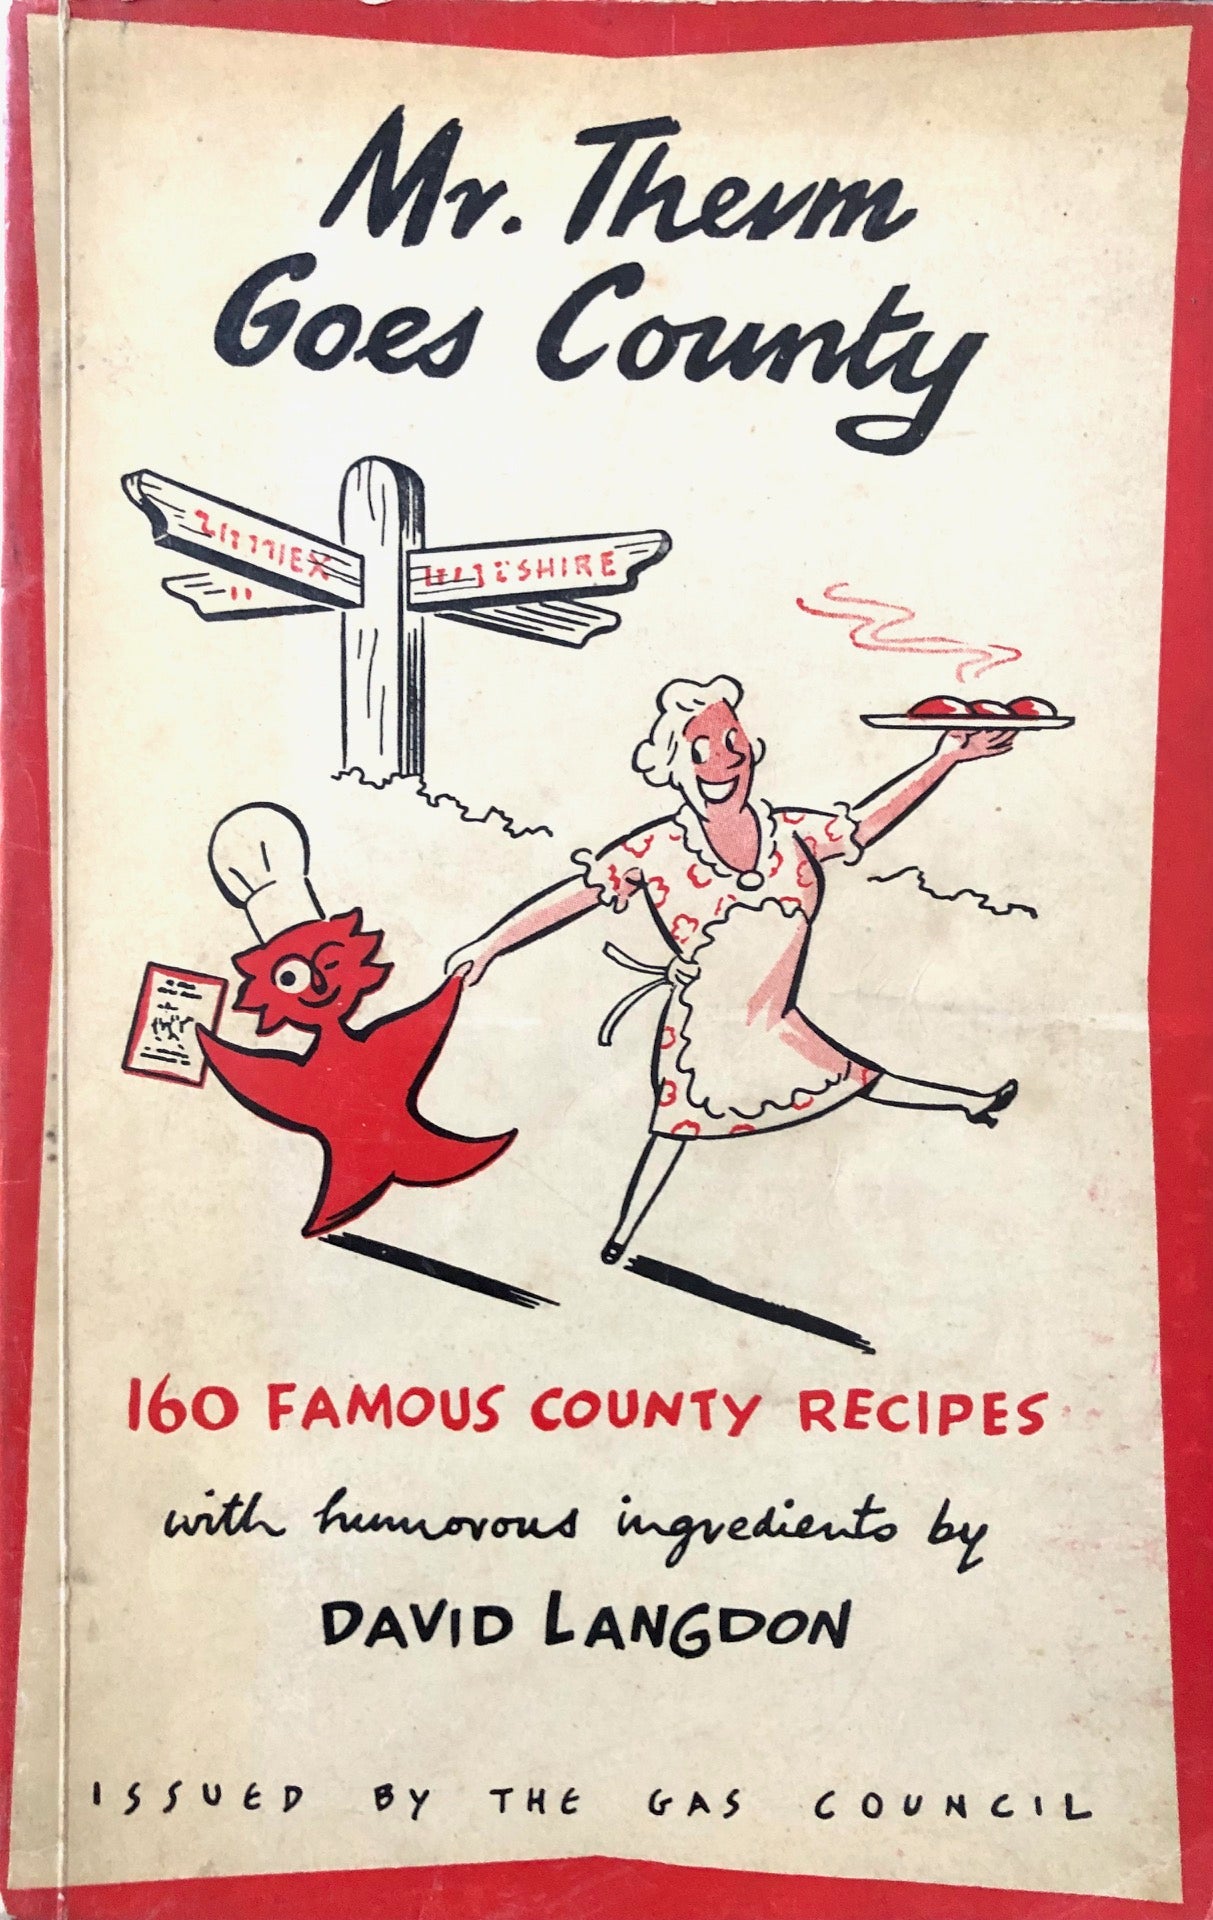 (British) [Heath, Ambrose]. Mr. Therm Goes County: 160 Famous County Recipes.